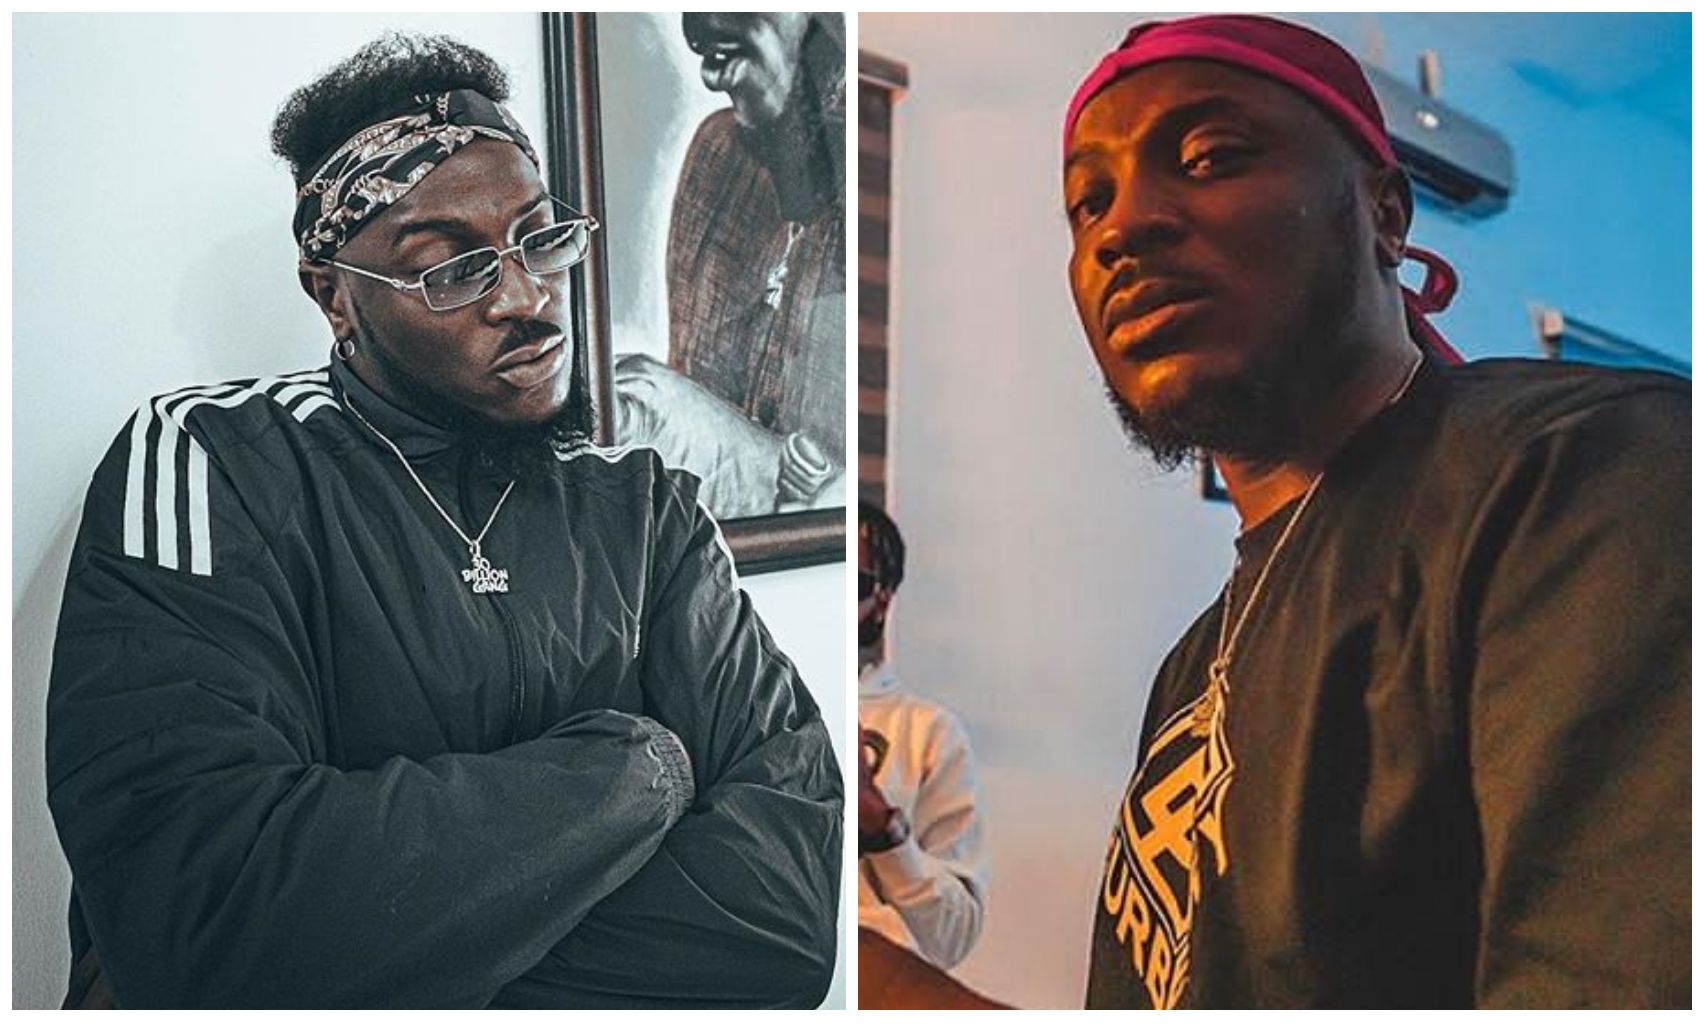 "I have never and will never be a rapist" – Peruzzi reacts to rape claims